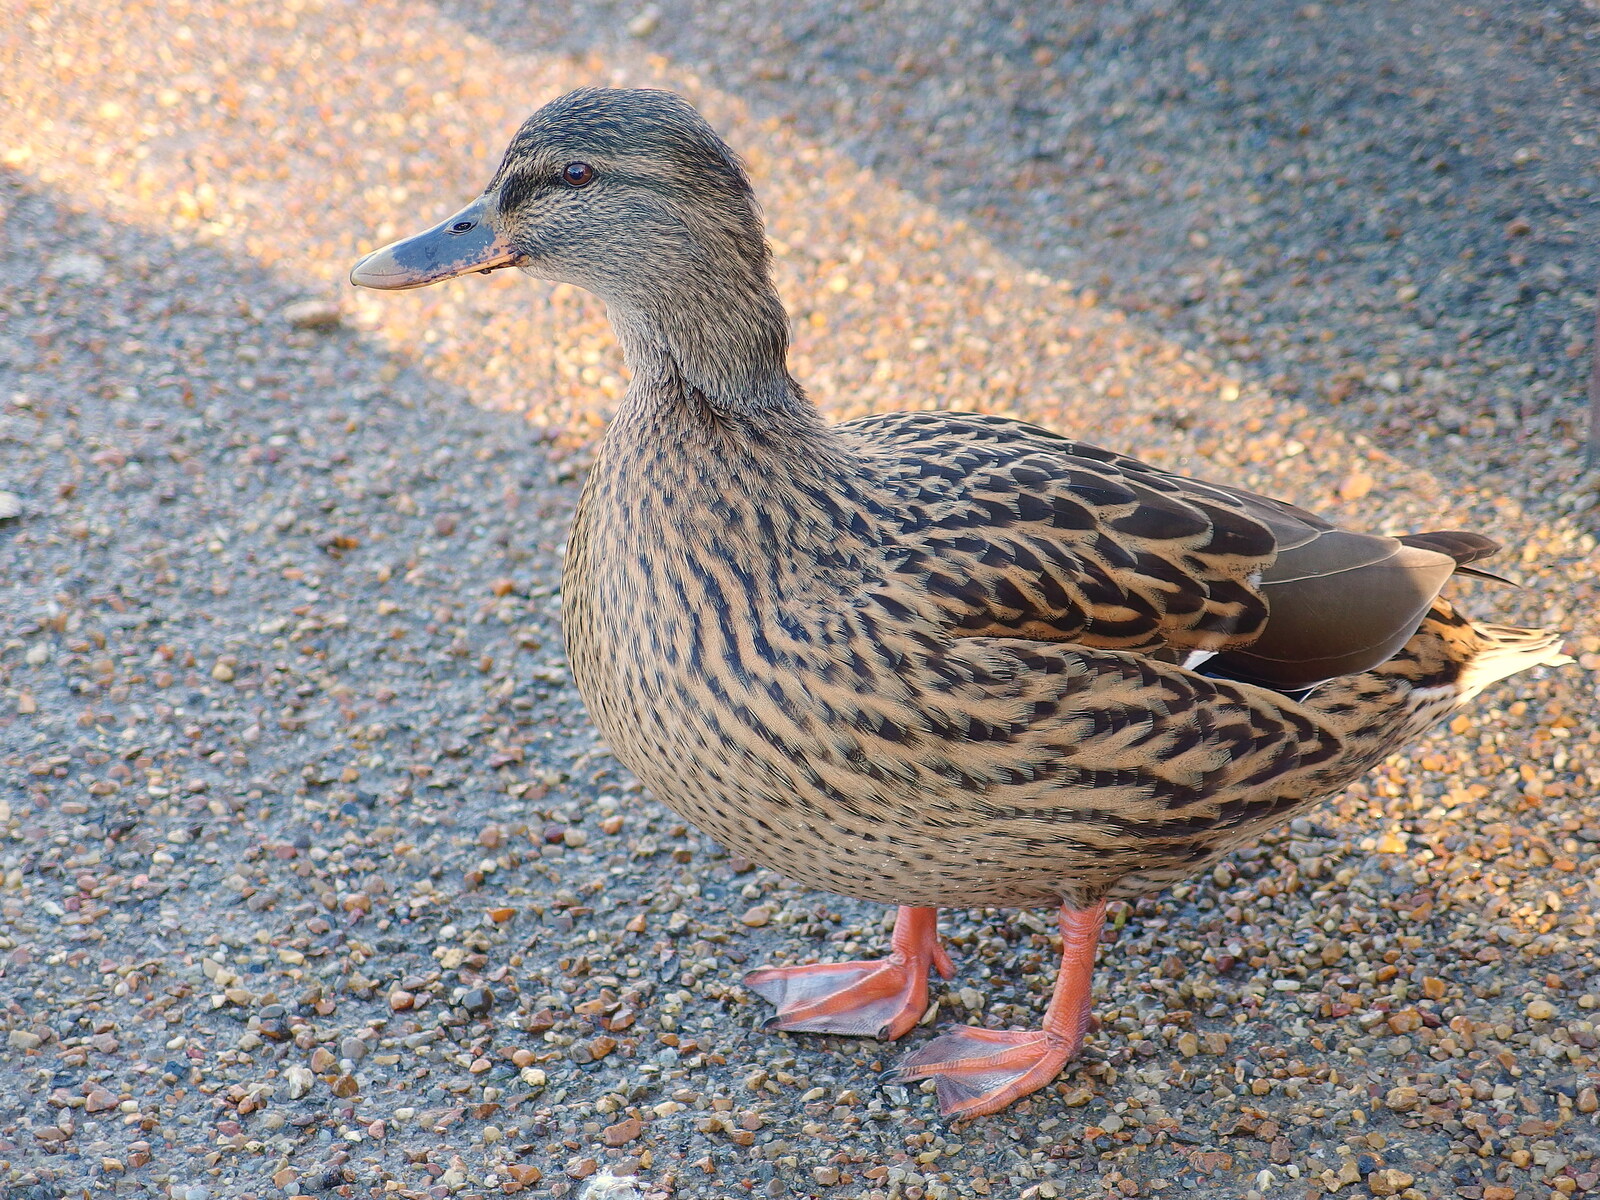 More Building and Palgrave Playground, Suffolk - 24th November 2013: A duck waddles around by the Mere